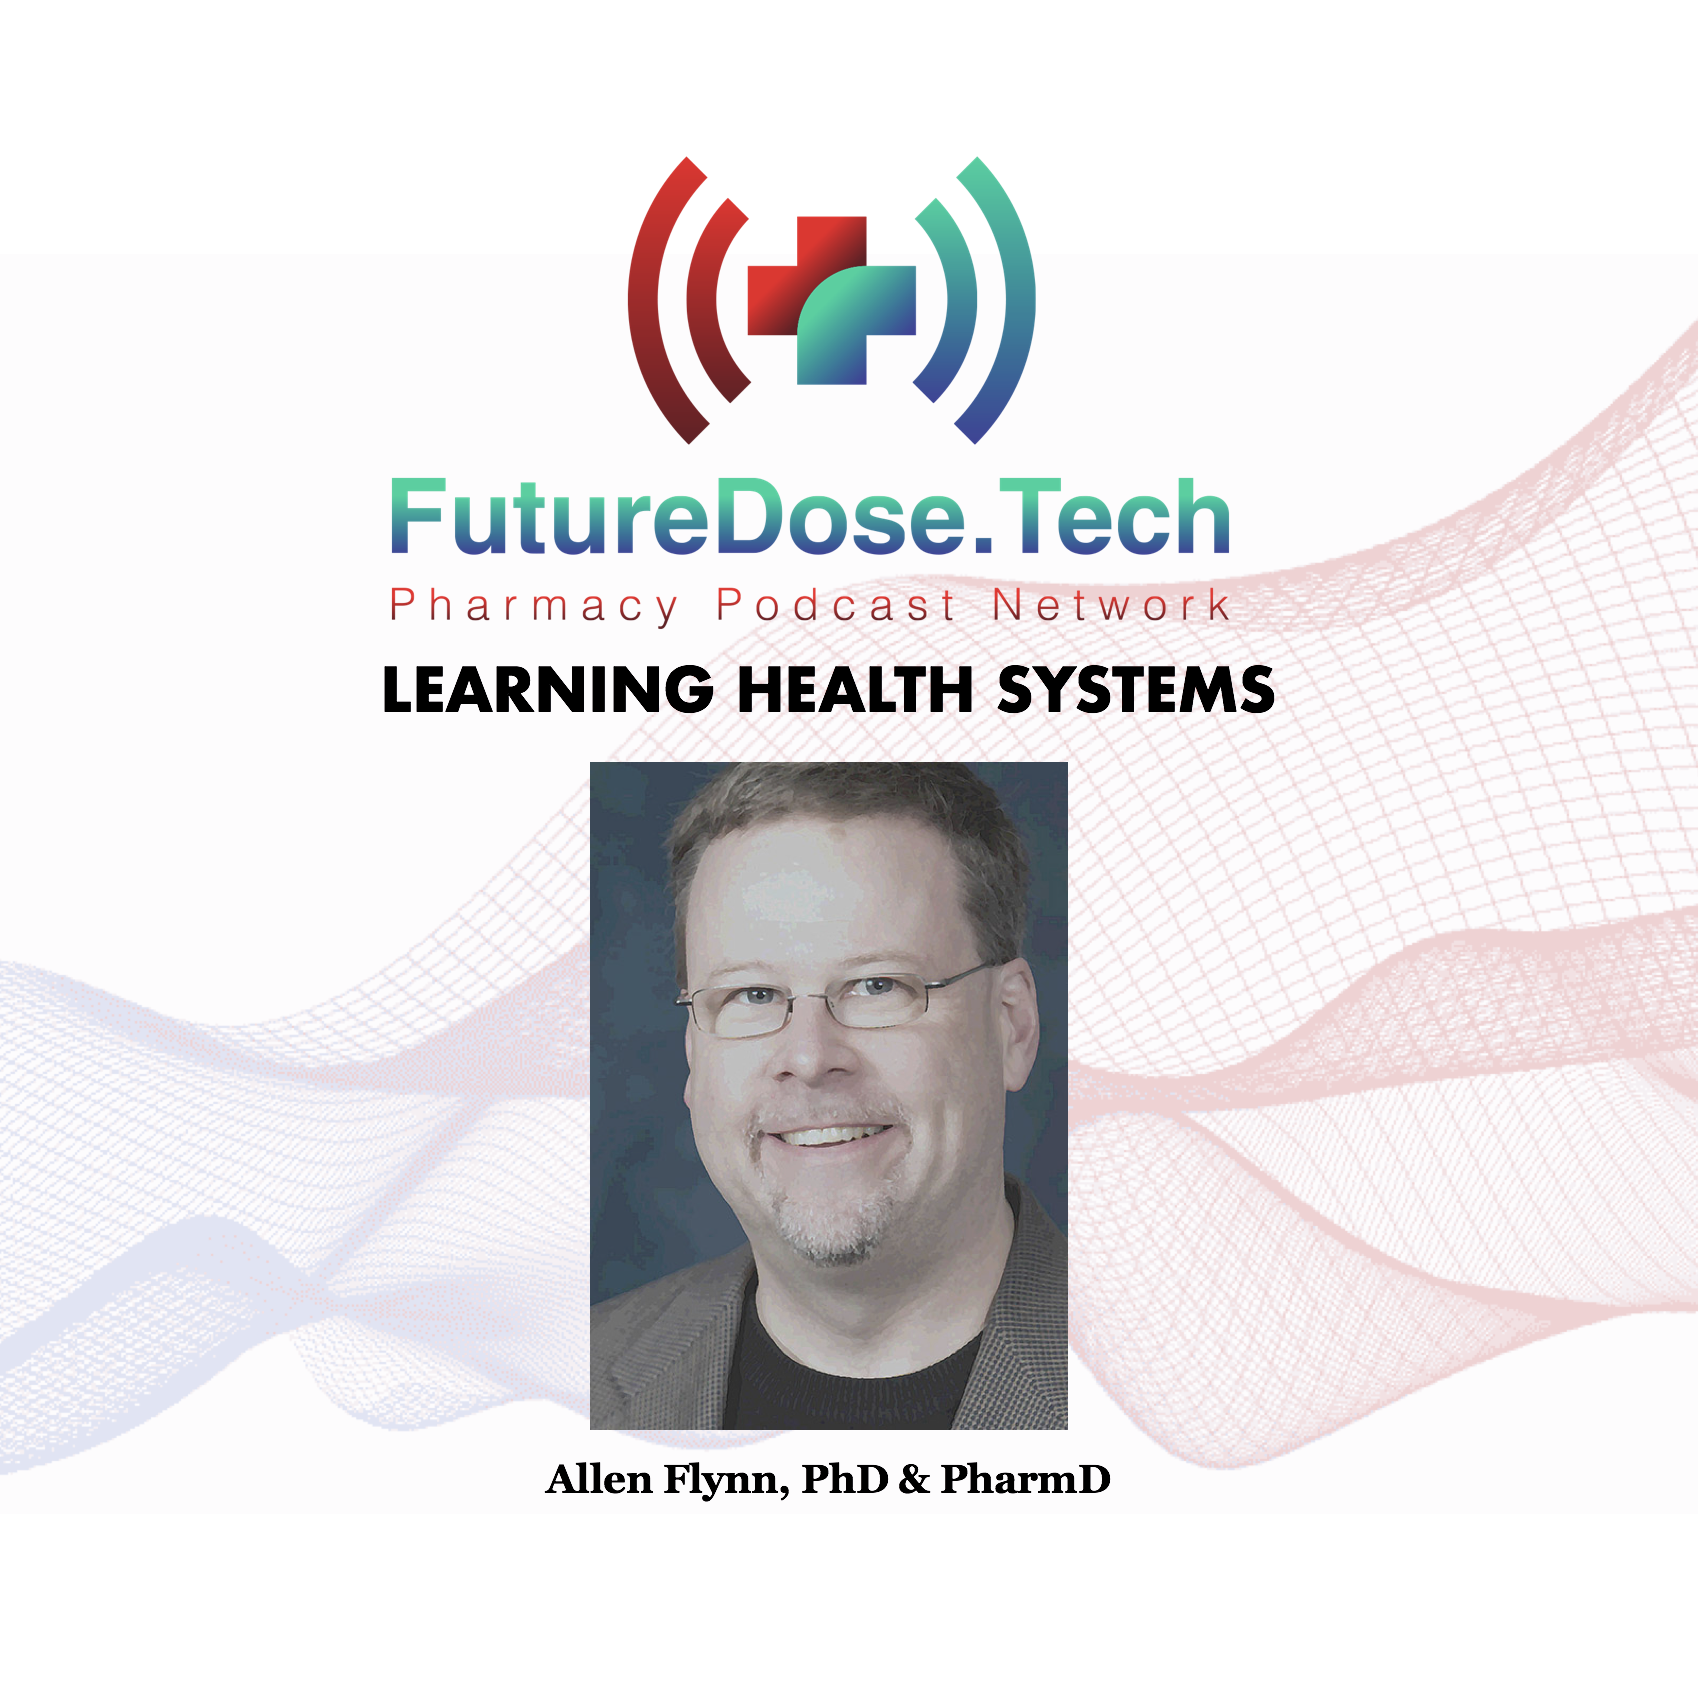 What are 'Learning Health Systems' special guest Allen Flynn, PhD, PharmD | FutureDose.tech